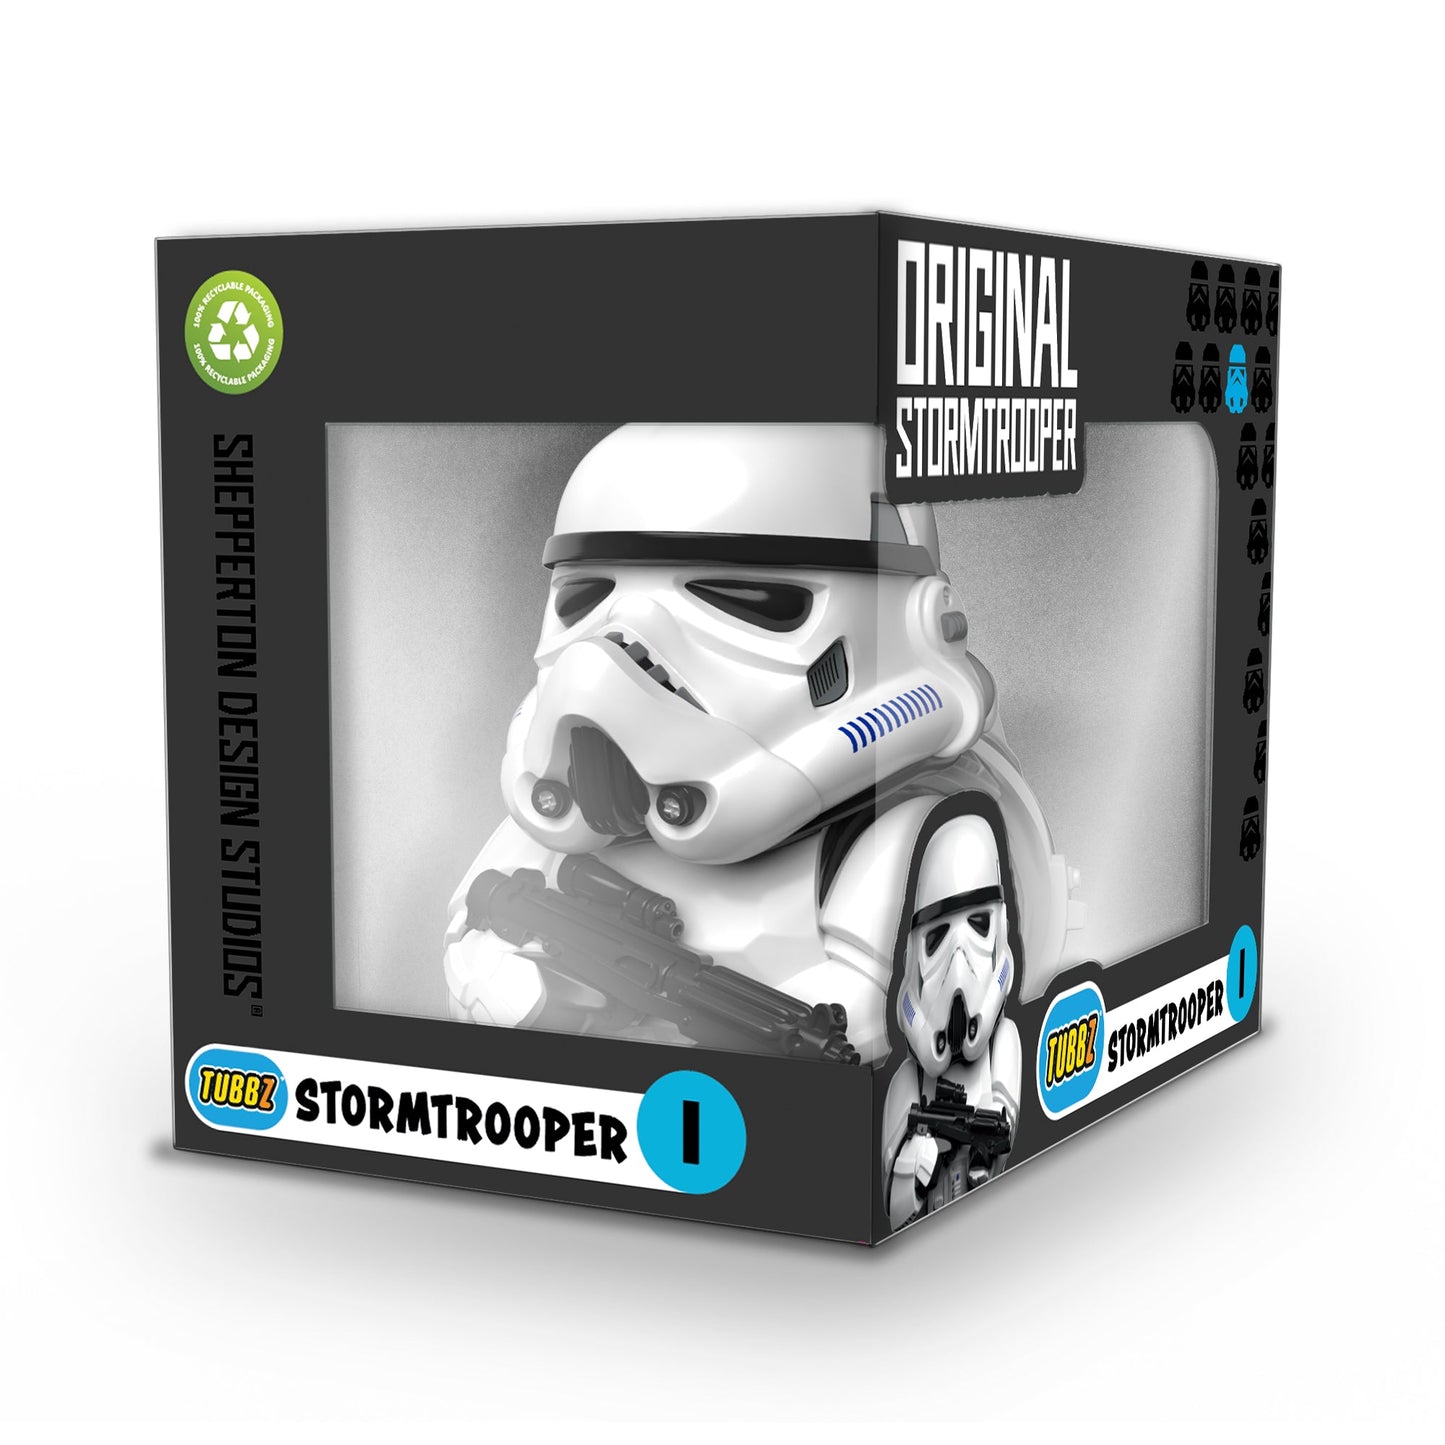 Stormtrooper Duck (Boxed Edition) - PRE-ORDER